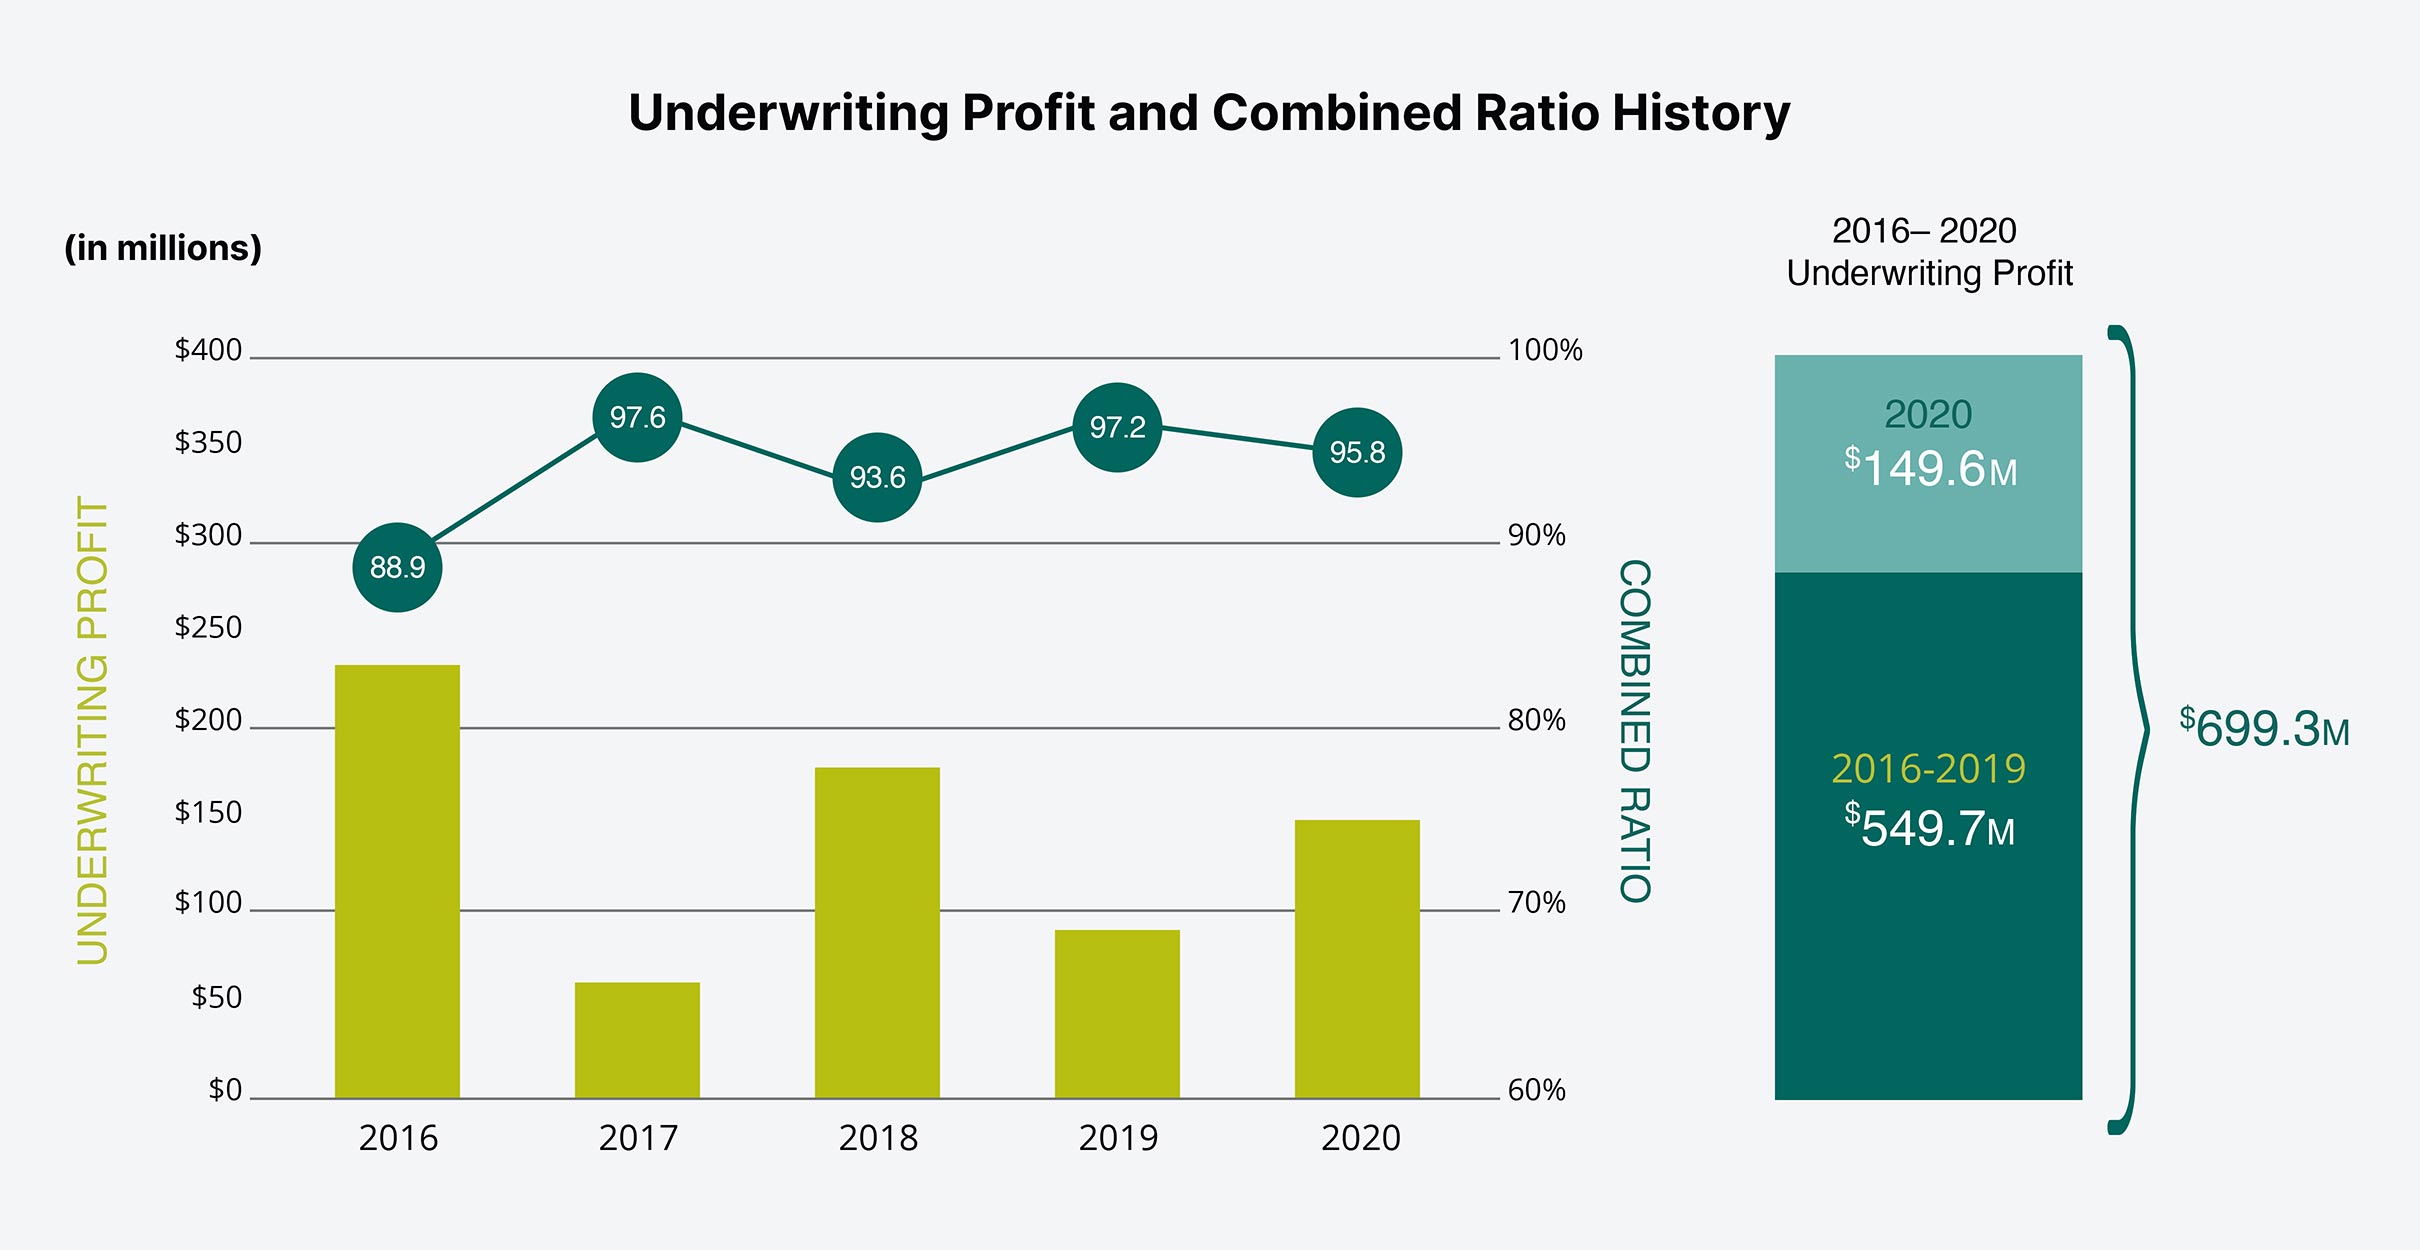 Underwriting profit and combined ratio history chart